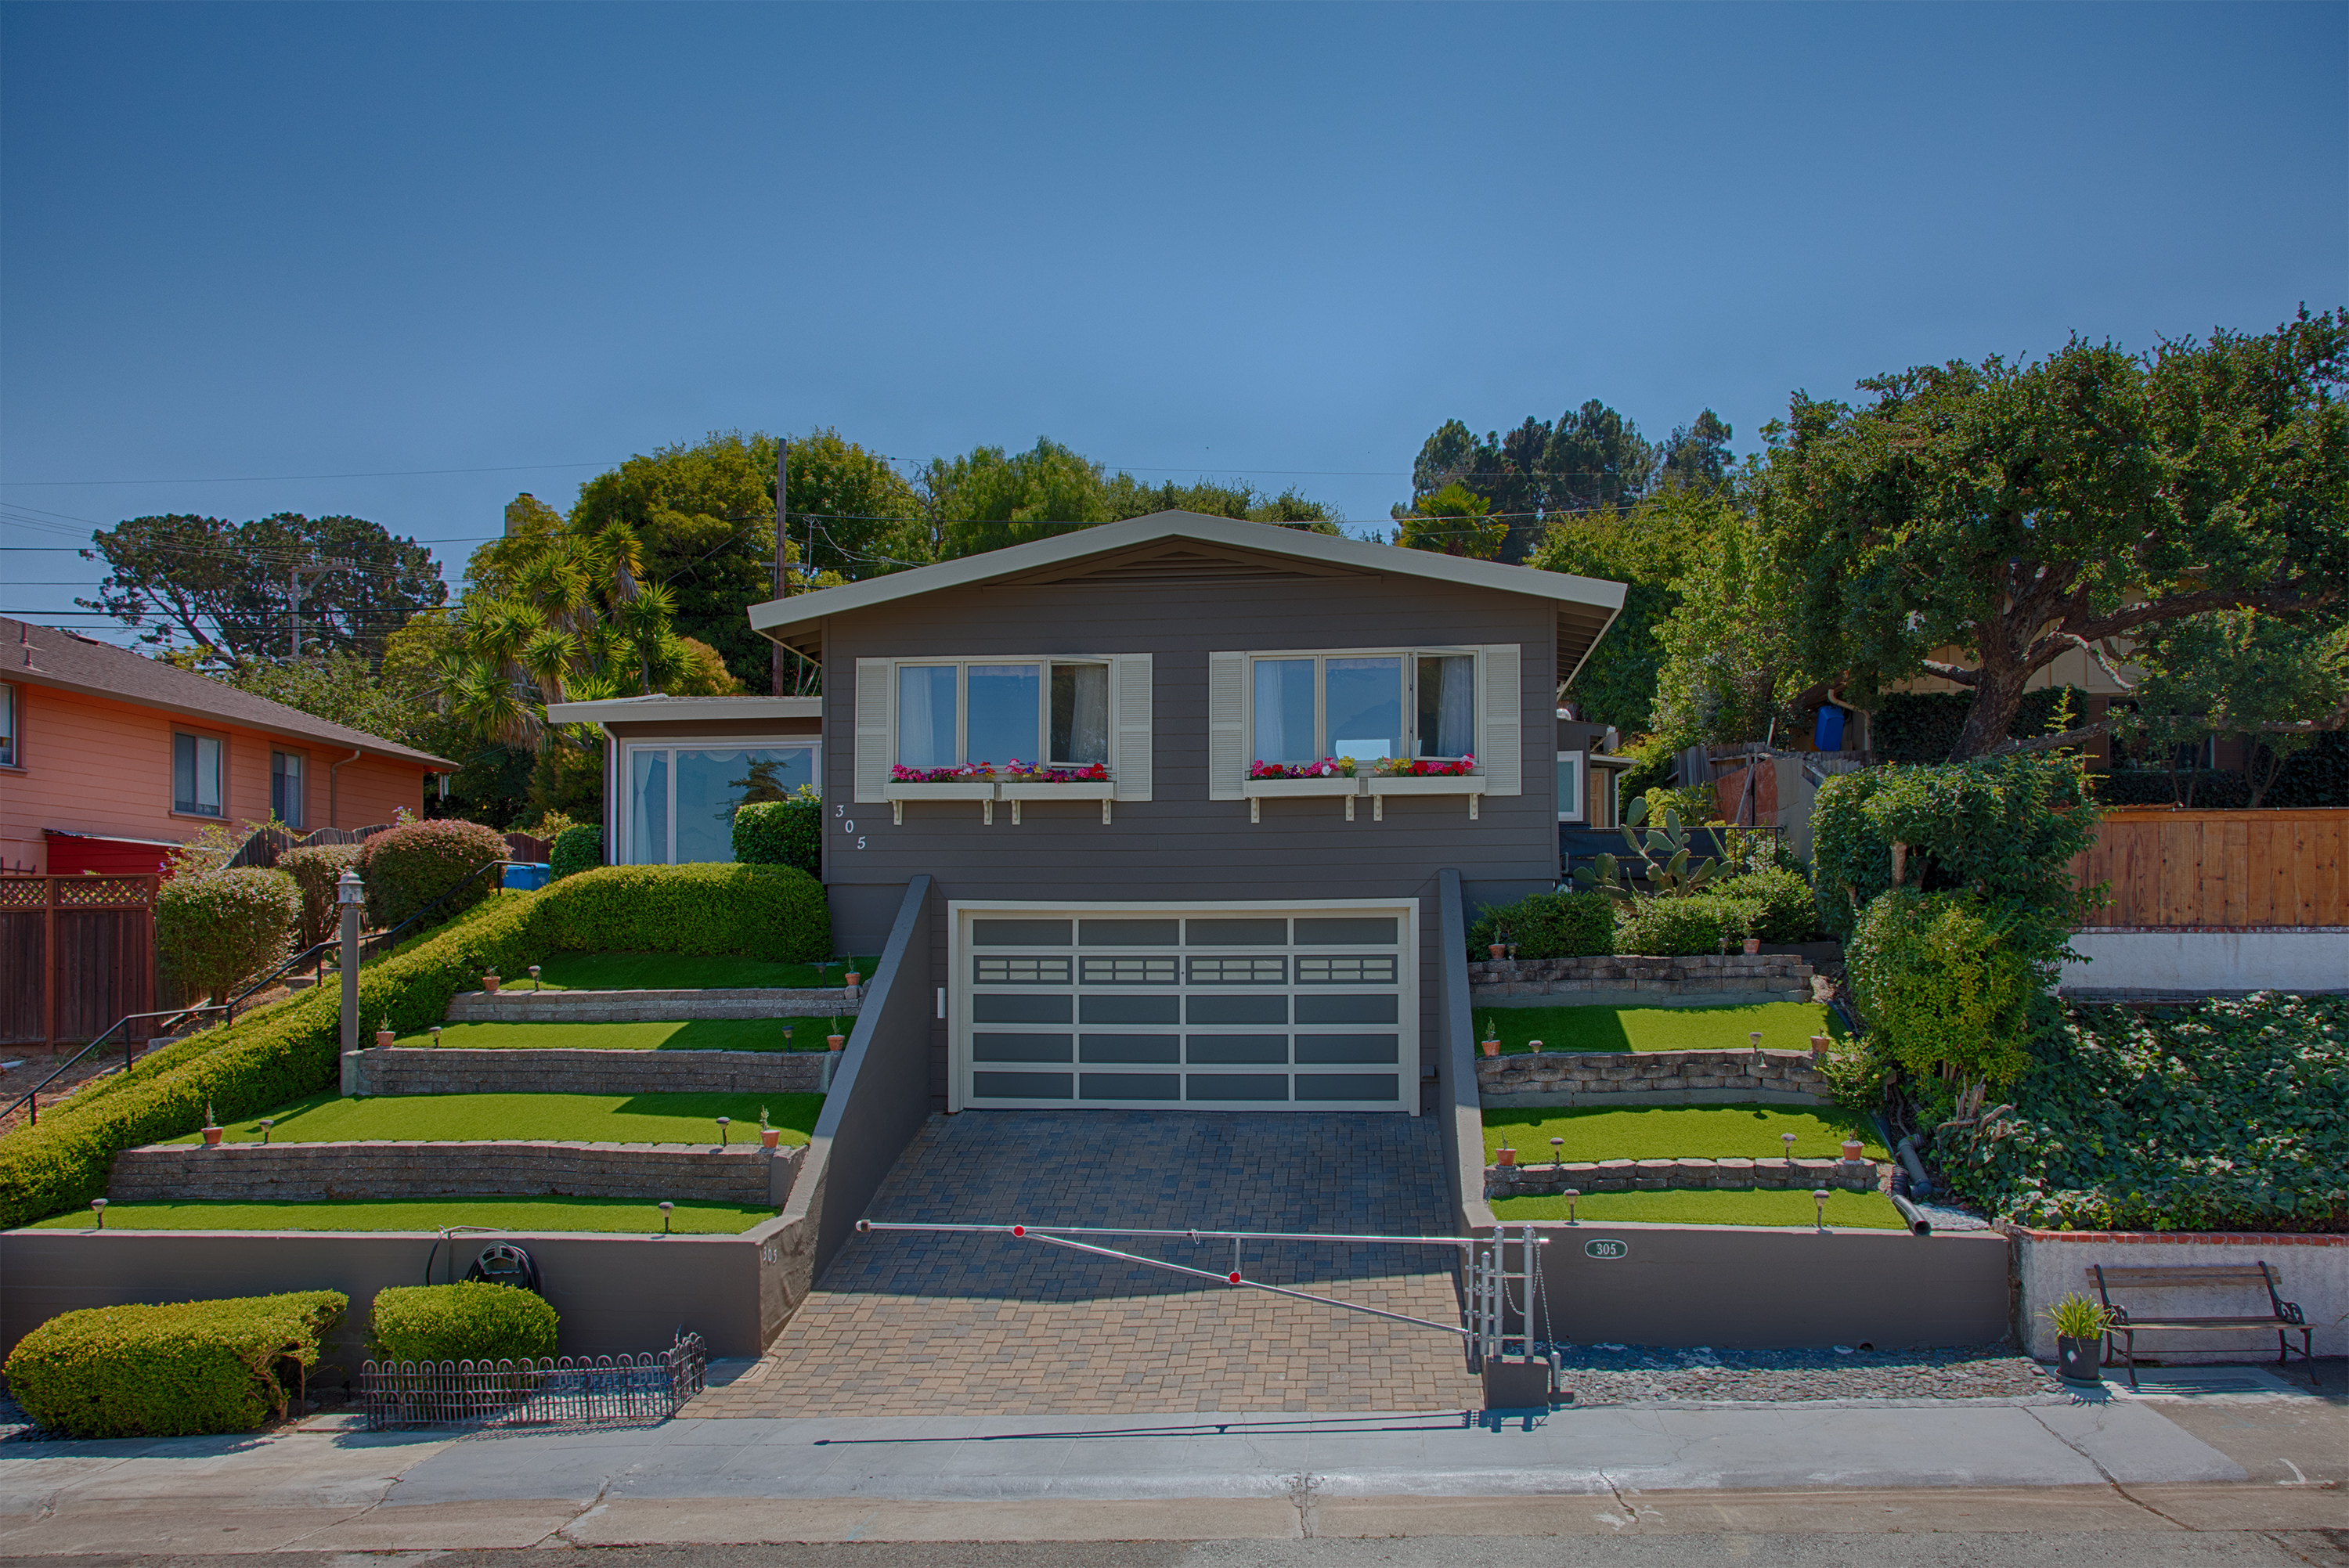 305 Rolling Hills Ave, San Mateo 94403 - Rolling Hills Ave 305 